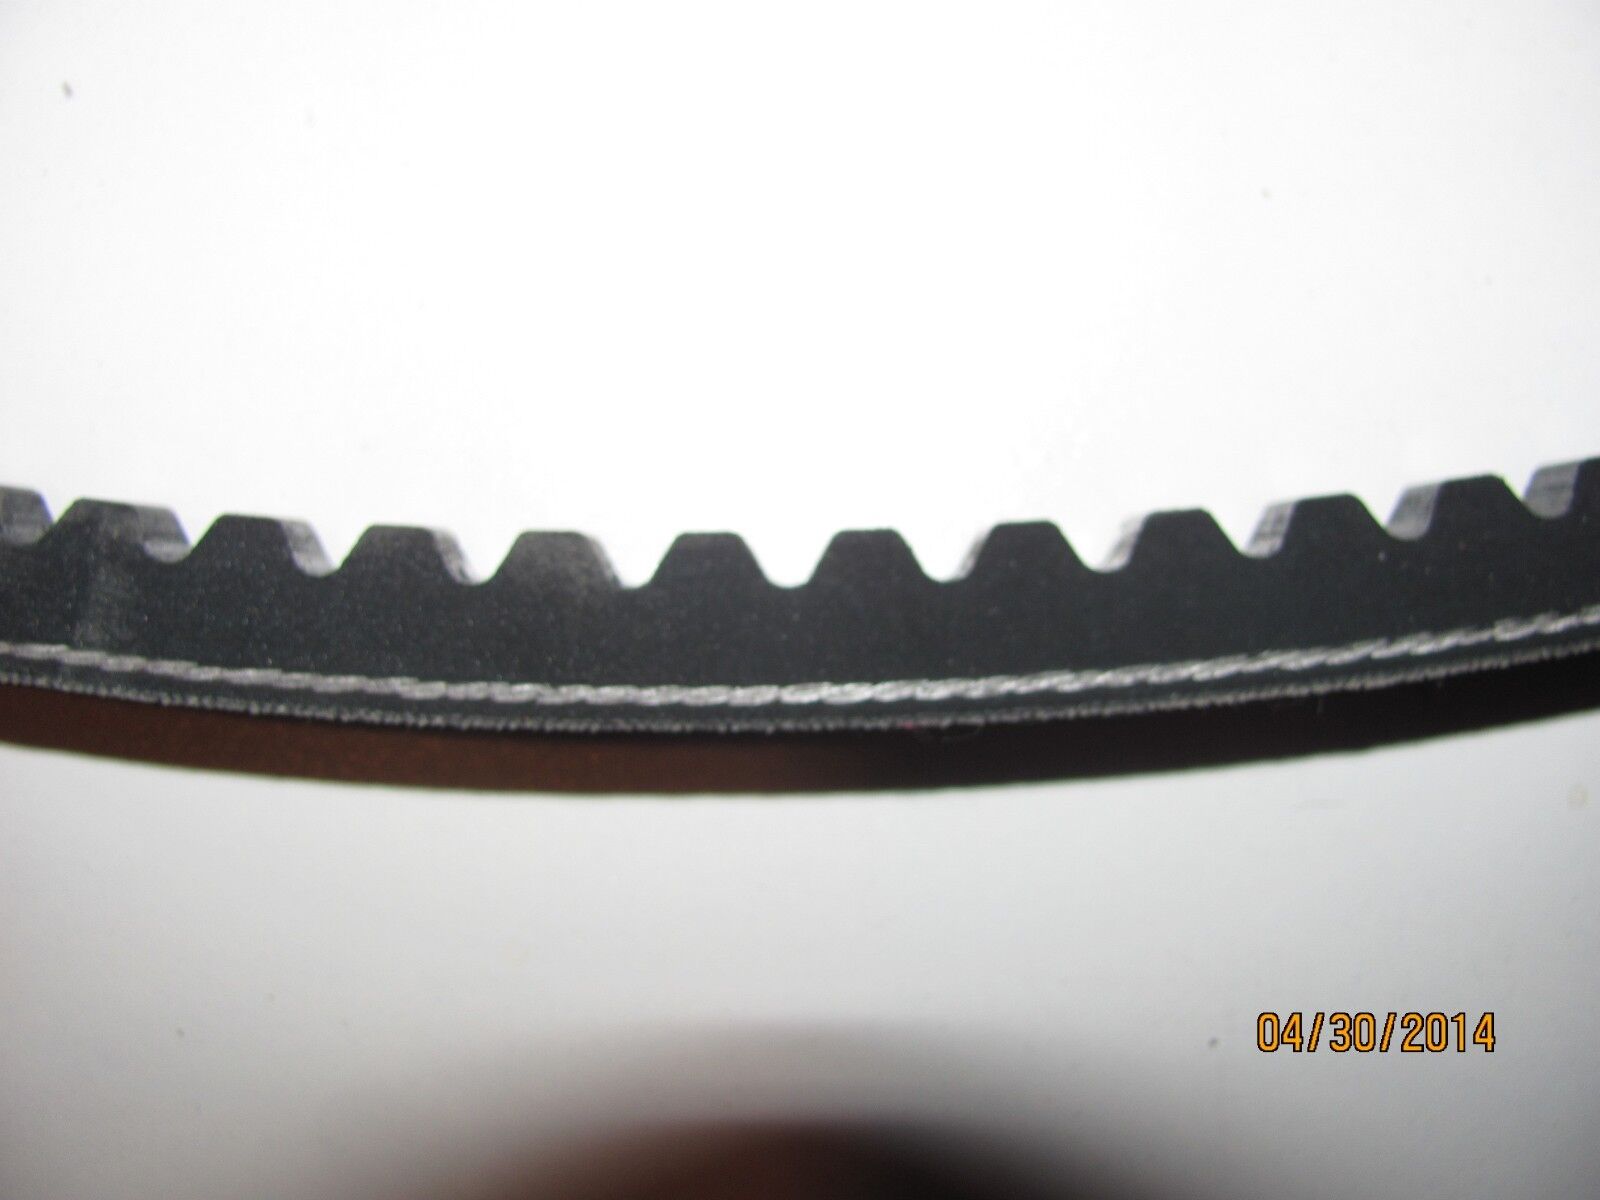 1 REPLACEMENT BELT FOR BEFCO C30-RD6 & C16 FOR 6' MOWERS- BEFCO 000-8950 PART #